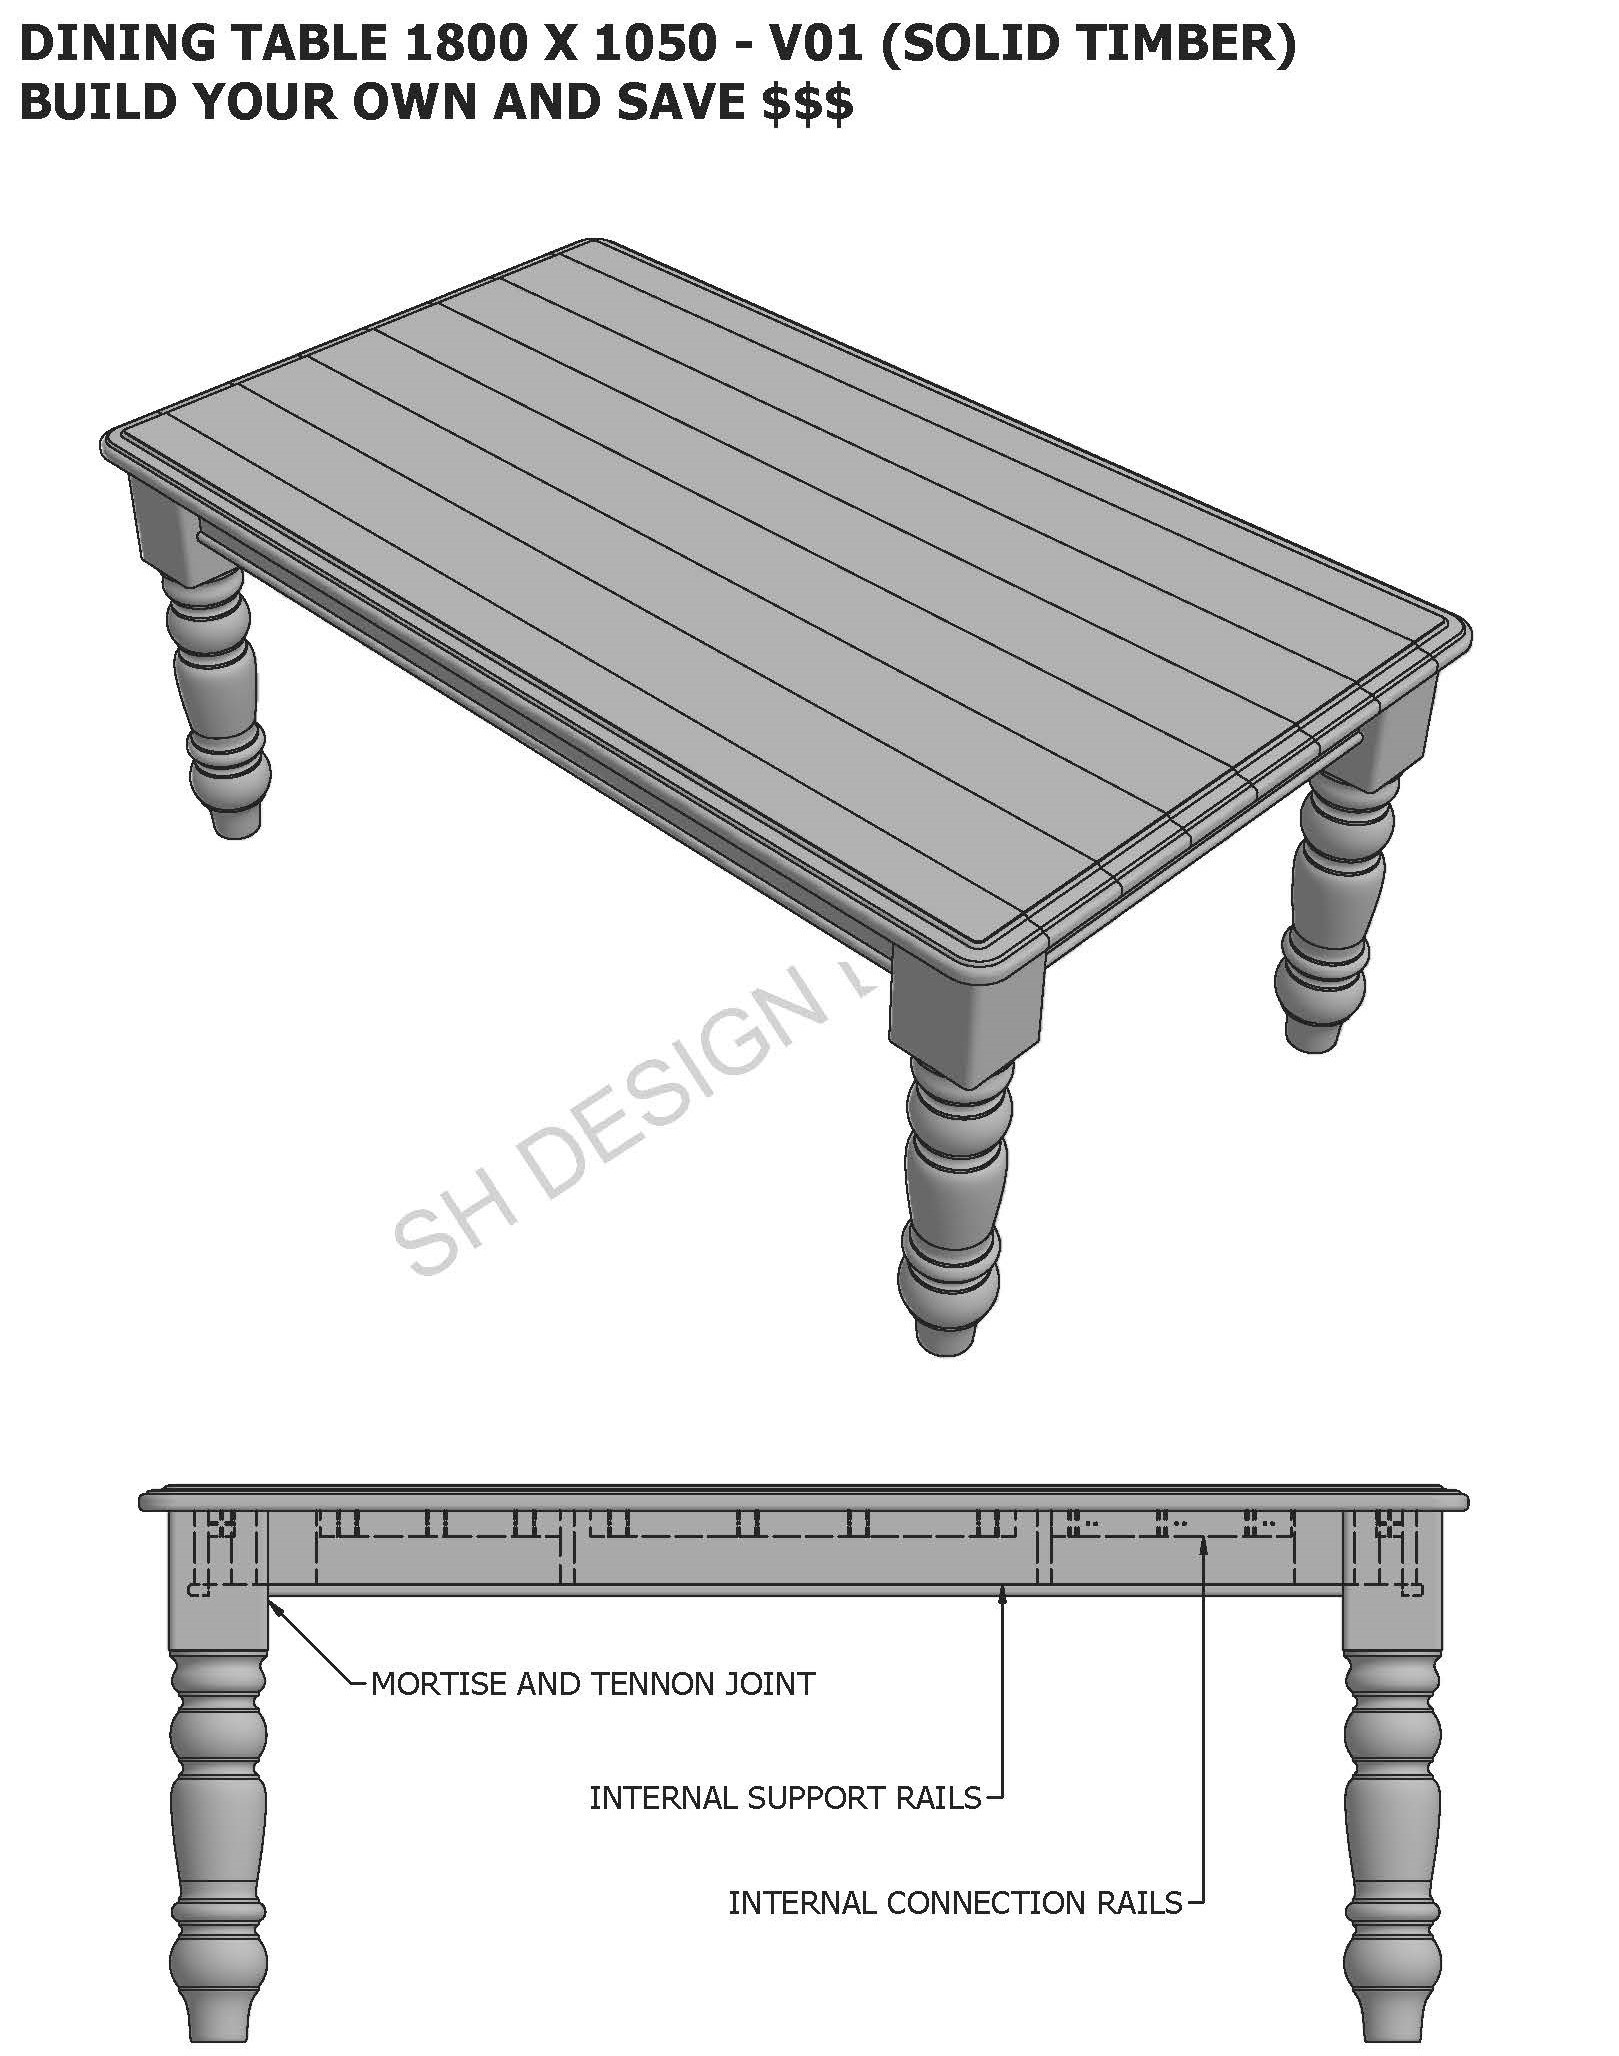 DINING TABLE V01 1050 x 1800 (70.8 x 41.3 inches)